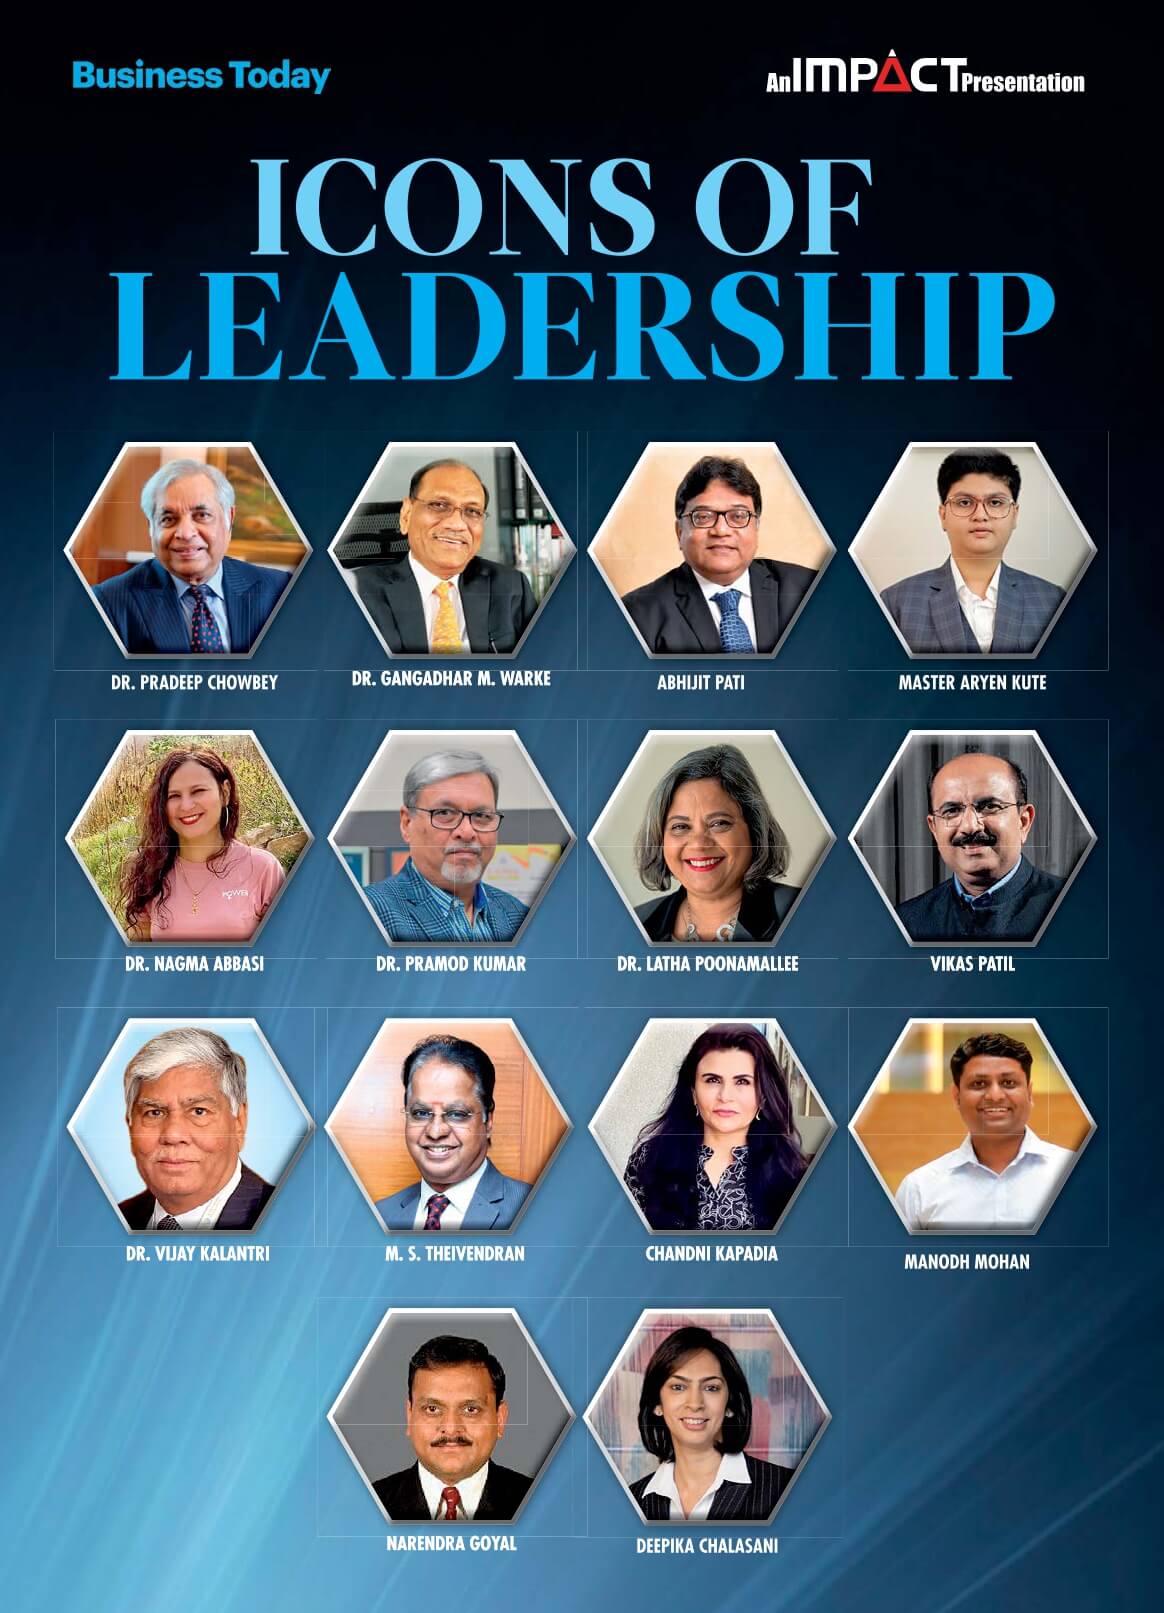 Master Aryen Suresh Kute featured as “Icons Of Leadership” in Business Today magazine